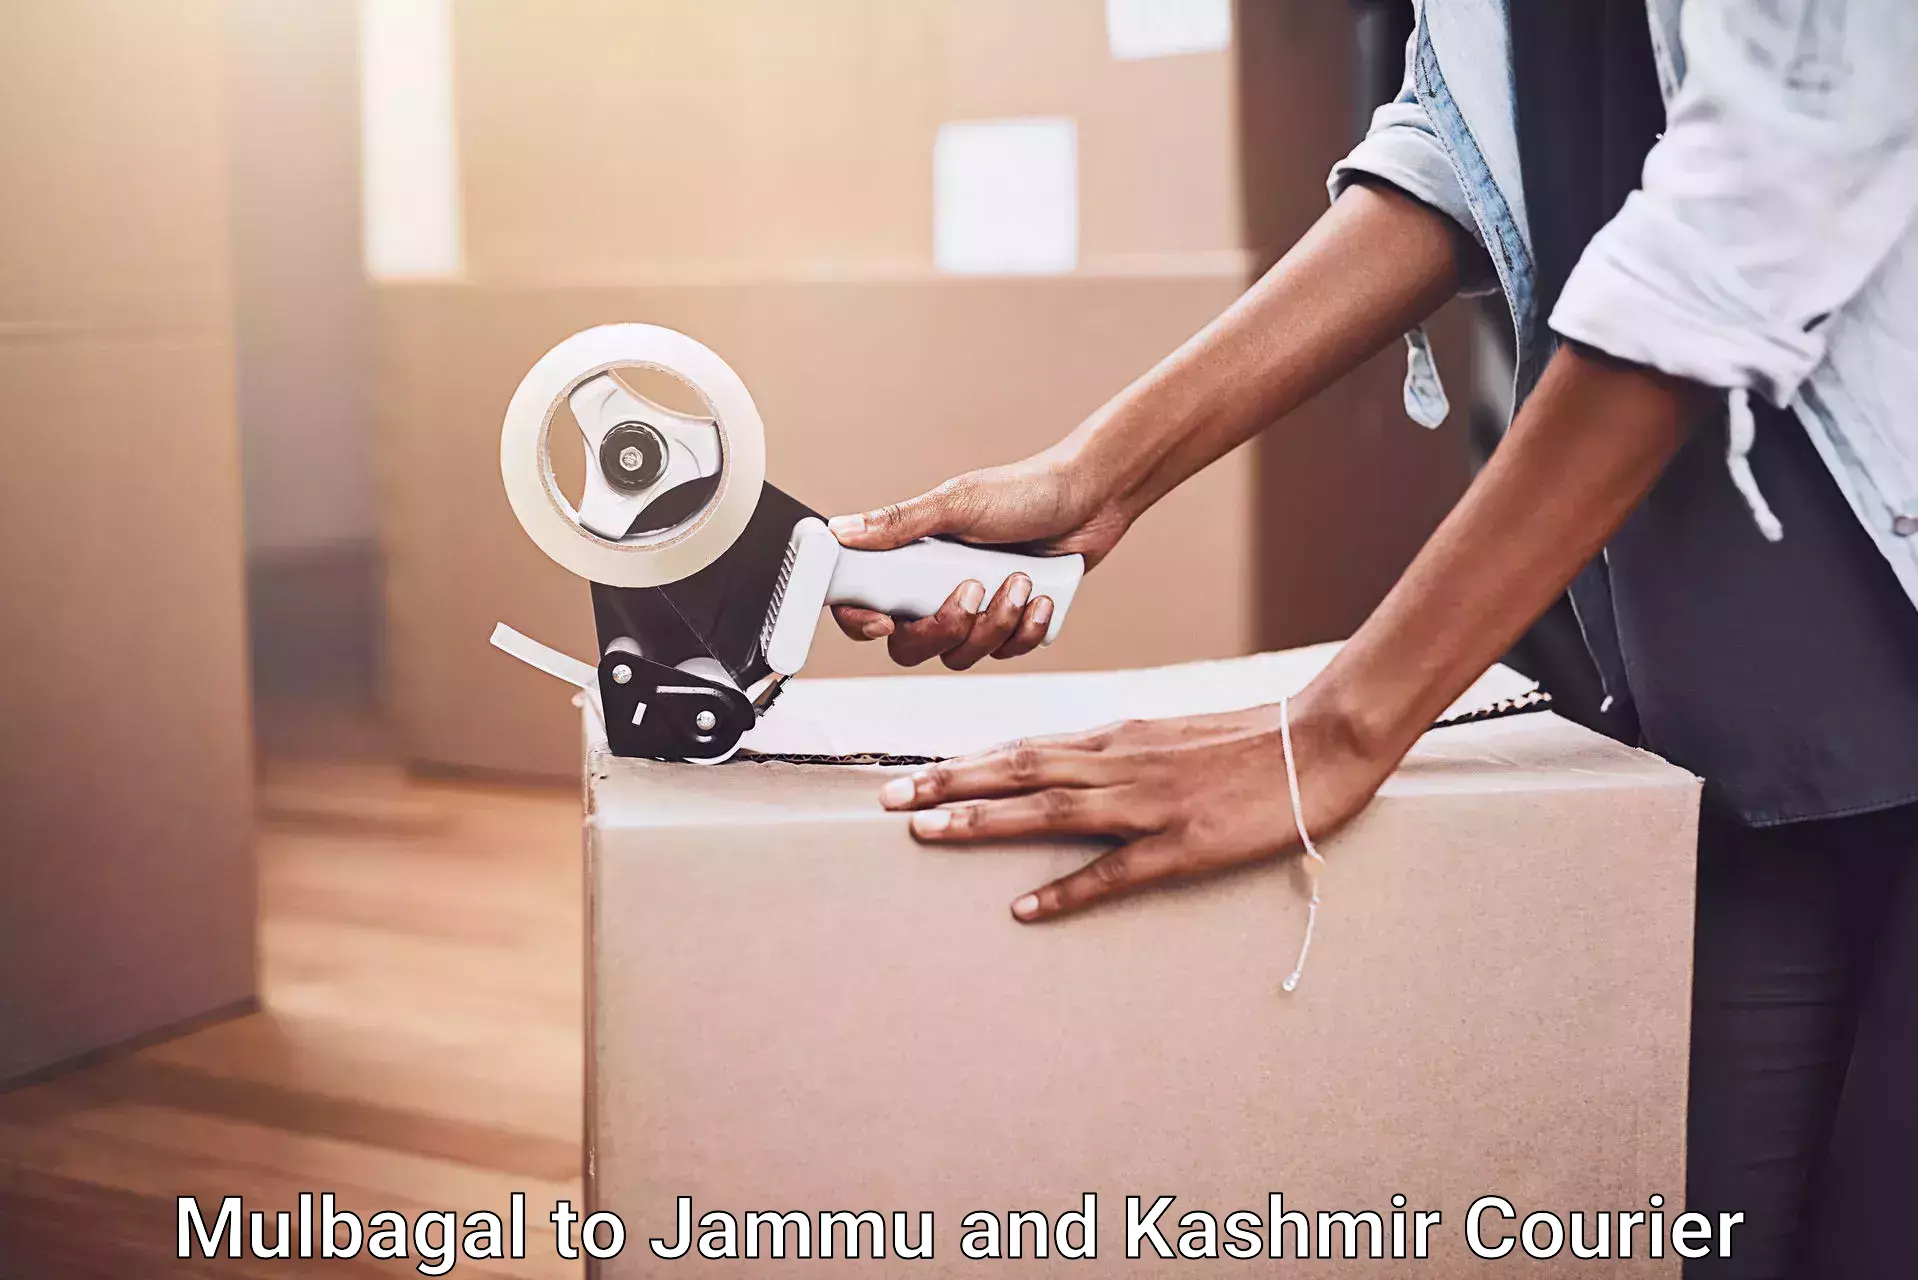 Furniture transport and storage Mulbagal to Jammu and Kashmir